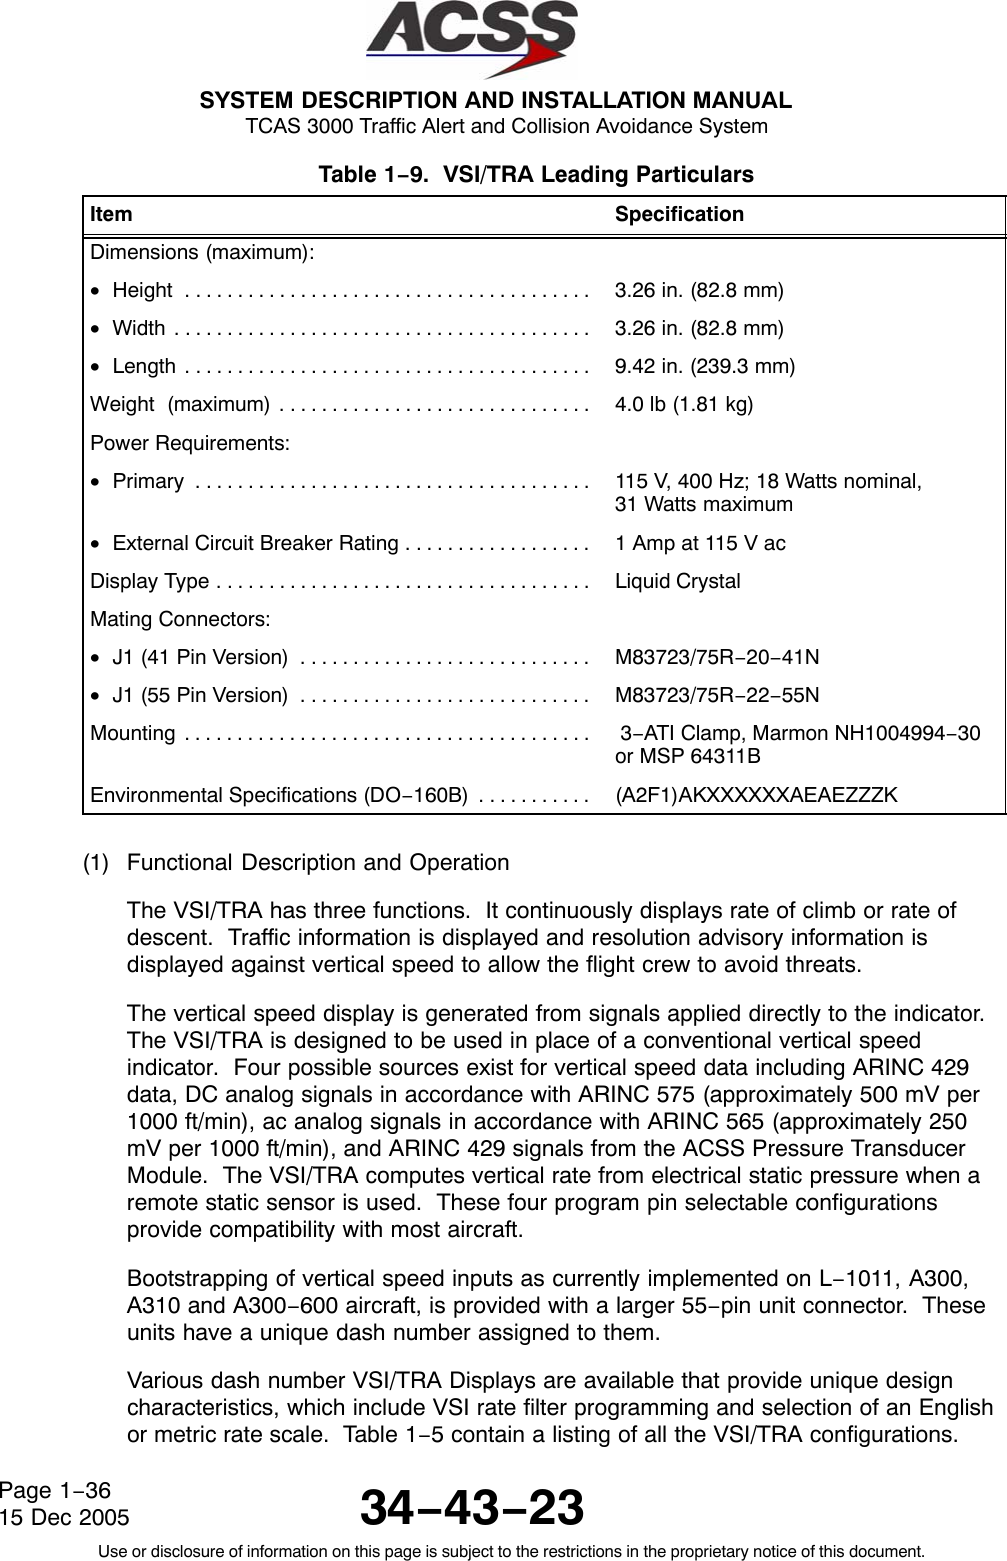  SYSTEM DESCRIPTION AND INSTALLATION MANUAL TCAS 3000 Traffic Alert and Collision Avoidance System34−43−23Use or disclosure of information on this page is subject to the restrictions in the proprietary notice of this document.Page 1−3615 Dec 2005Table 1−9.  VSI/TRA Leading Particulars  Item SpecificationDimensions (maximum):•Height . . . . . . . . . . . . . . . . . . . . . . . . . . . . . . . . . . . . . . .  3.26 in. (82.8 mm)•Width . . . . . . . . . . . . . . . . . . . . . . . . . . . . . . . . . . . . . . . .  3.26 in. (82.8 mm)•Length . . . . . . . . . . . . . . . . . . . . . . . . . . . . . . . . . . . . . . .  9.42 in. (239.3 mm)Weight  (maximum) . . . . . . . . . . . . . . . . . . . . . . . . . . . . . .  4.0 lb (1.81 kg)Power Requirements:•Primary . . . . . . . . . . . . . . . . . . . . . . . . . . . . . . . . . . . . . .  115 V, 400 Hz; 18 Watts nominal, 31 Watts maximum•External Circuit Breaker Rating . . . . . . . . . . . . . . . . . .  1 Amp at 115 V acDisplay Type . . . . . . . . . . . . . . . . . . . . . . . . . . . . . . . . . . . .  Liquid CrystalMating Connectors:•J1 (41 Pin Version) . . . . . . . . . . . . . . . . . . . . . . . . . . . .  M83723/75R−20−41N•J1 (55 Pin Version) . . . . . . . . . . . . . . . . . . . . . . . . . . . .  M83723/75R−22−55NMounting . . . . . . . . . . . . . . . . . . . . . . . . . . . . . . . . . . . . . . .   3−ATI Clamp, Marmon NH1004994−30or MSP 64311BEnvironmental Specifications (DO−160B) . . . . . . . . . . .  (A2F1)AKXXXXXXAEAEZZZK(1) Functional Description and OperationThe VSI/TRA has three functions.  It continuously displays rate of climb or rate ofdescent.  Traffic information is displayed and resolution advisory information isdisplayed against vertical speed to allow the flight crew to avoid threats.The vertical speed display is generated from signals applied directly to the indicator.The VSI/TRA is designed to be used in place of a conventional vertical speedindicator.  Four possible sources exist for vertical speed data including ARINC 429data, DC analog signals in accordance with ARINC 575 (approximately 500 mV per1000 ft/min), ac analog signals in accordance with ARINC 565 (approximately 250mV per 1000 ft/min), and ARINC 429 signals from the ACSS Pressure TransducerModule.  The VSI/TRA computes vertical rate from electrical static pressure when aremote static sensor is used.  These four program pin selectable configurationsprovide compatibility with most aircraft.Bootstrapping of vertical speed inputs as currently implemented on L−1011, A300,A310 and A300−600 aircraft, is provided with a larger 55−pin unit connector.  Theseunits have a unique dash number assigned to them.Various dash number VSI/TRA Displays are available that provide unique designcharacteristics, which include VSI rate filter programming and selection of an Englishor metric rate scale.  Table 1−5 contain a listing of all the VSI/TRA configurations.